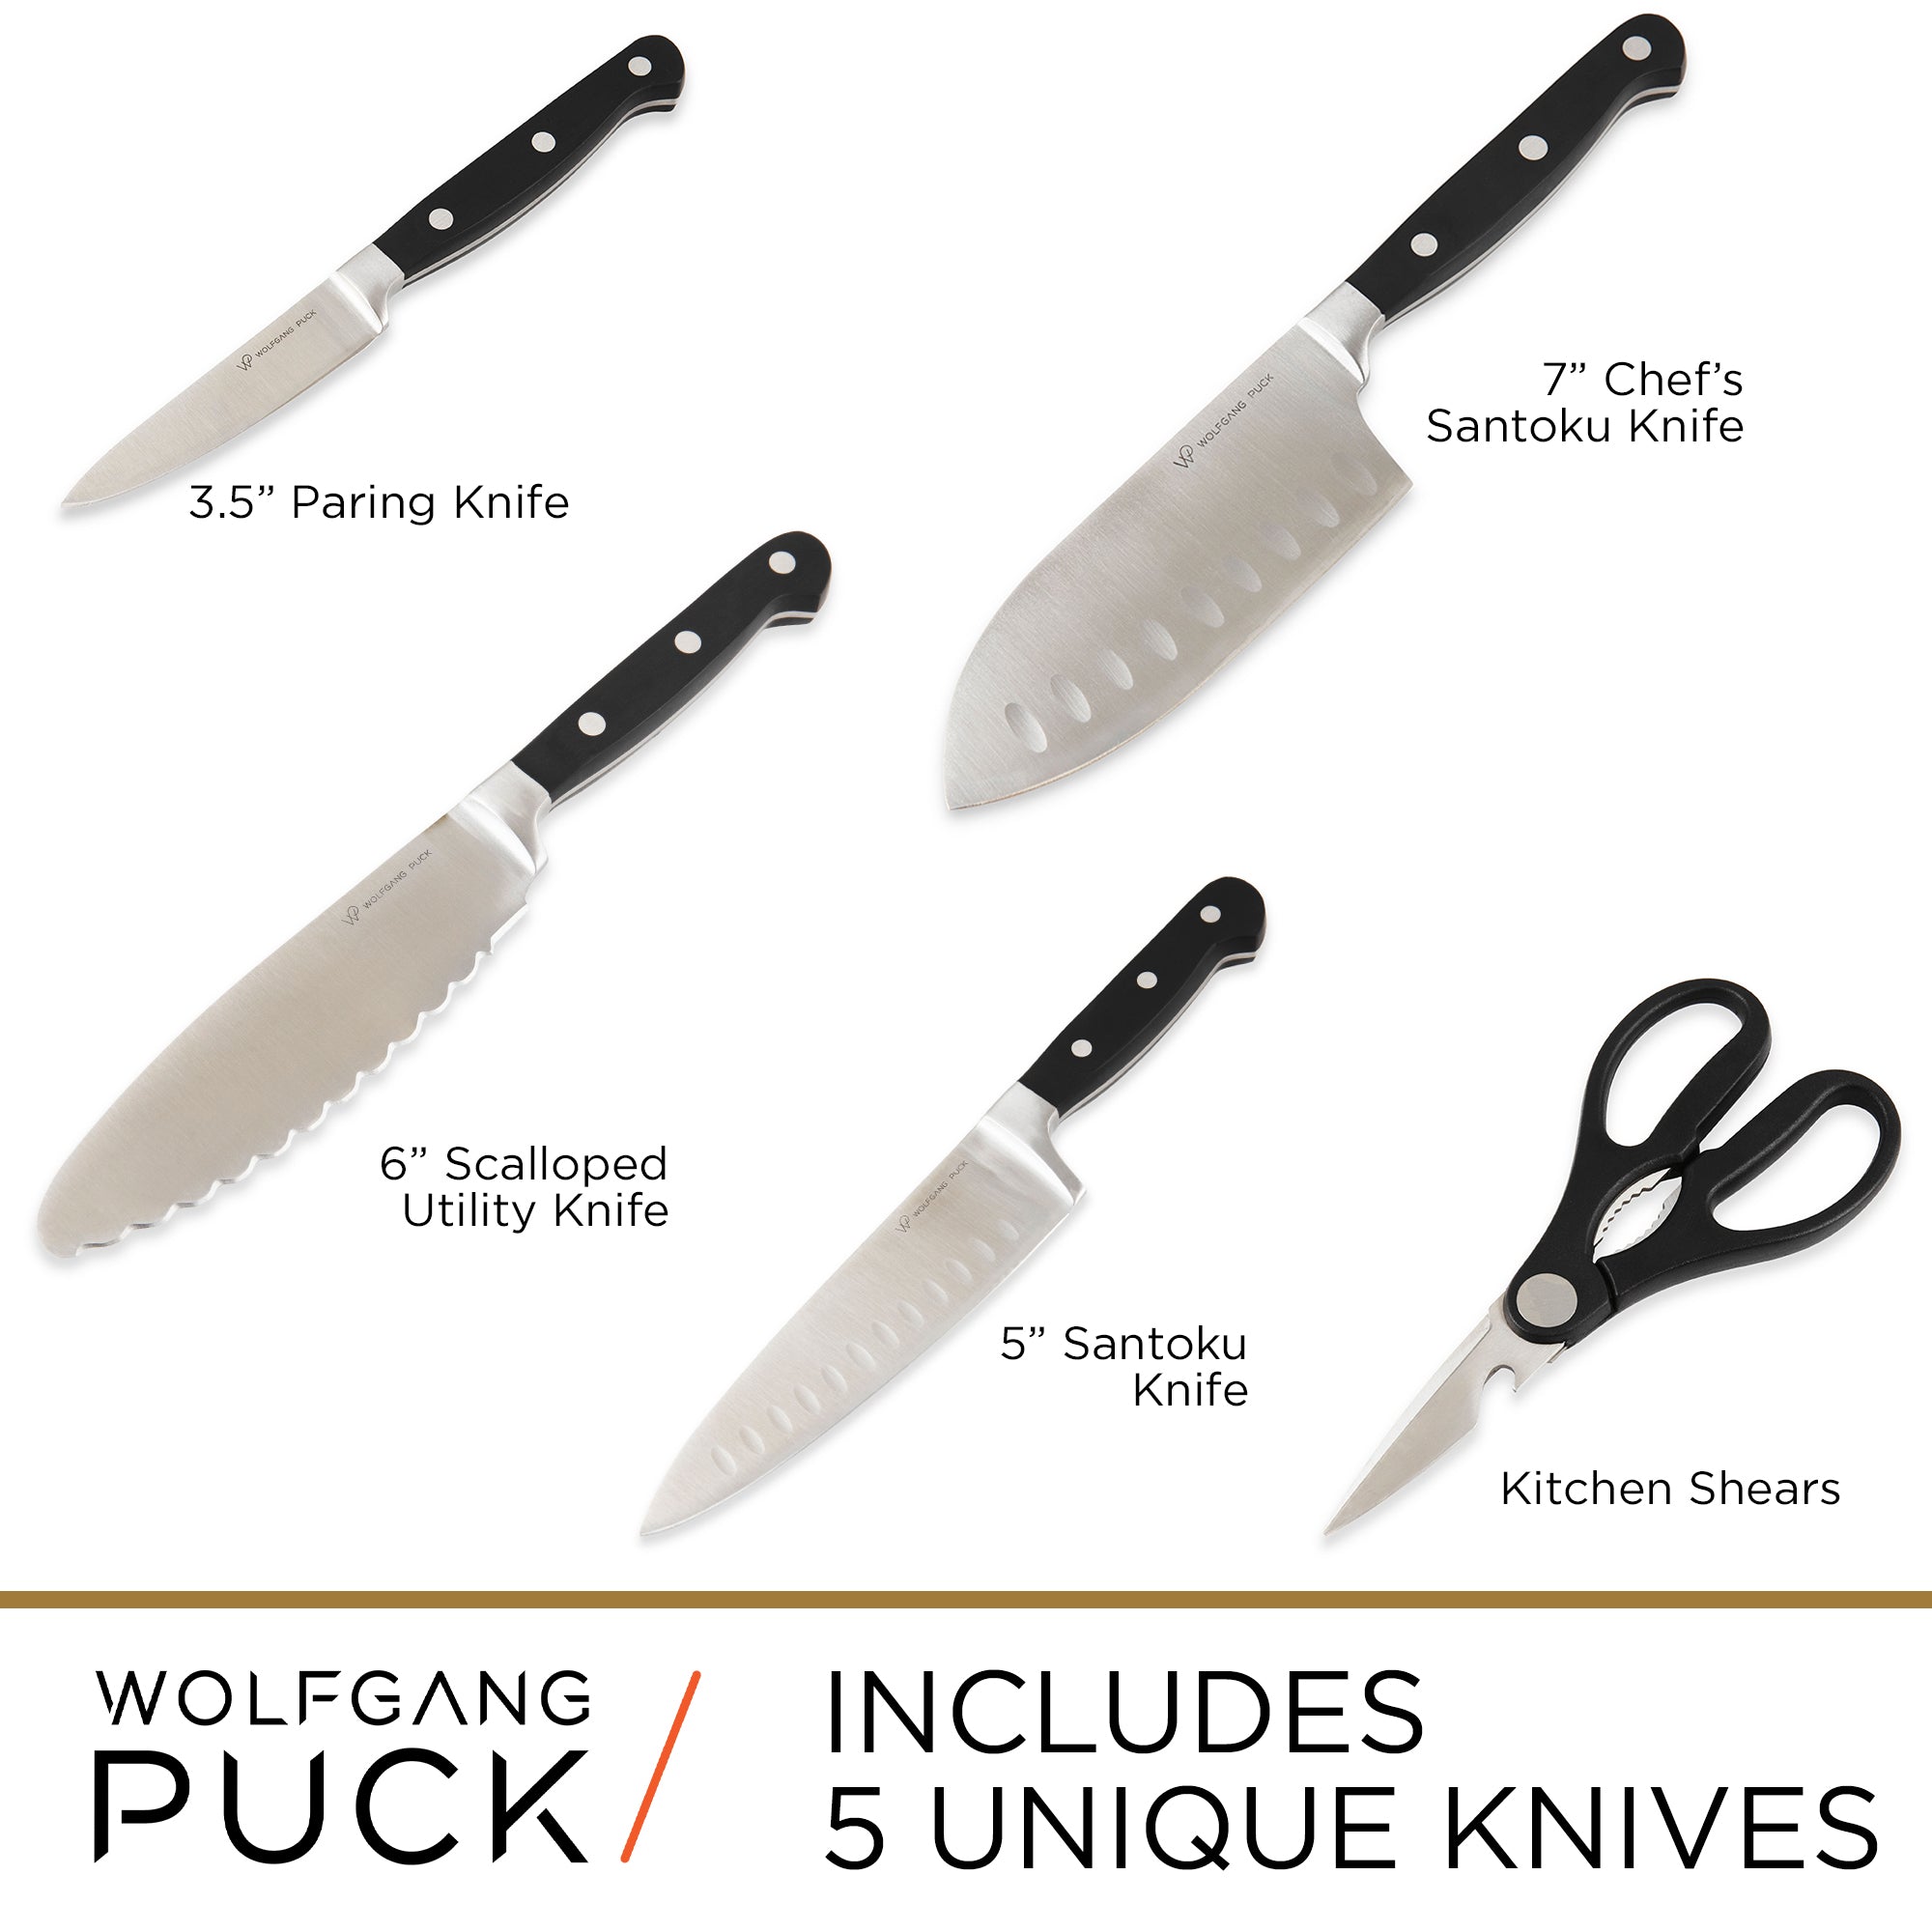 5 unique knives and kitchen shears by Wolfgang Puck